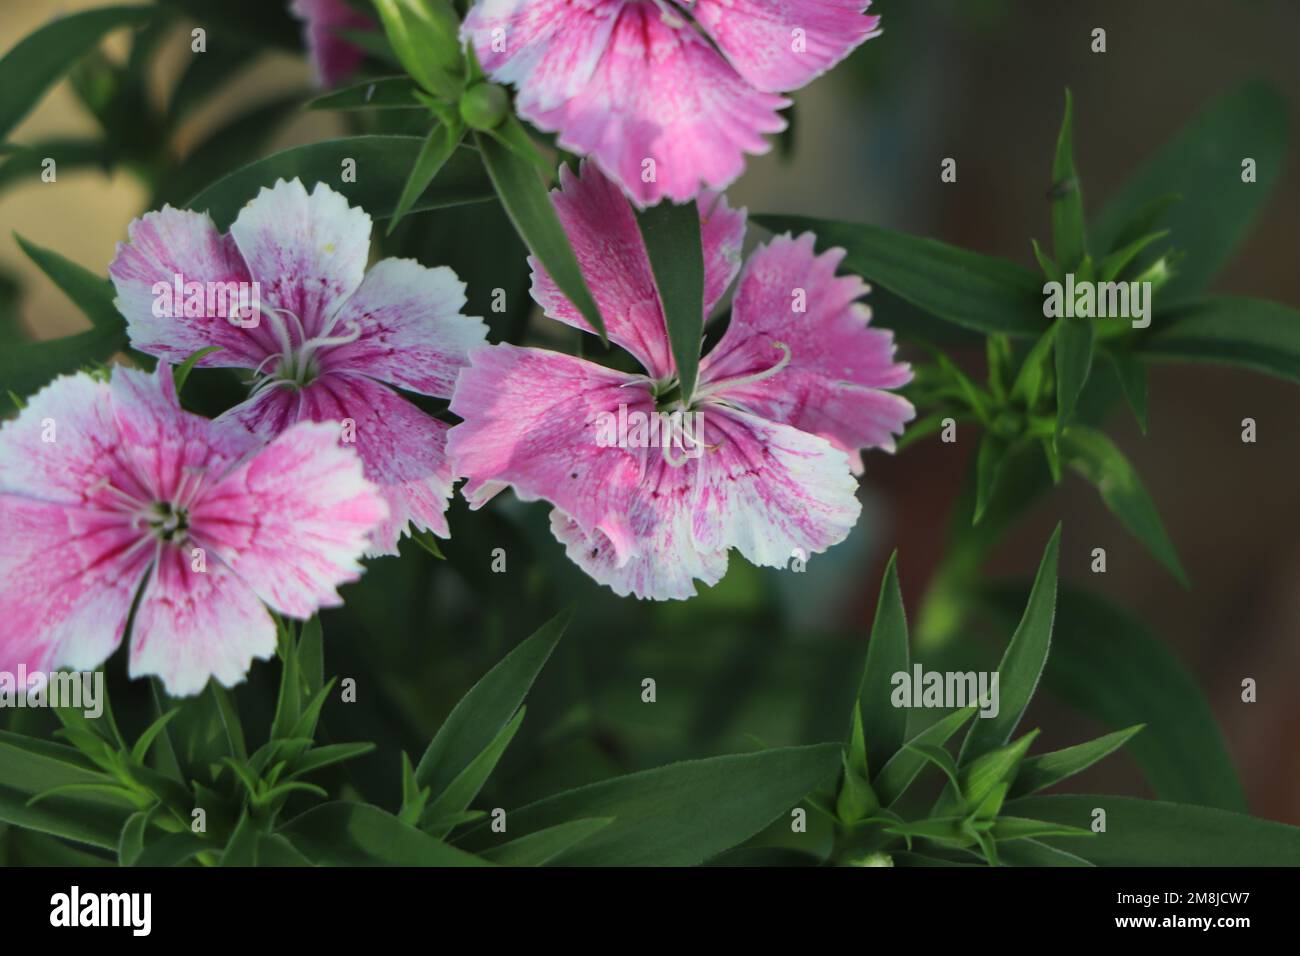 Cheddar pink or clove pink carnation is herbaceous flowering plant in the family Caryophyllaceae Stock Photo